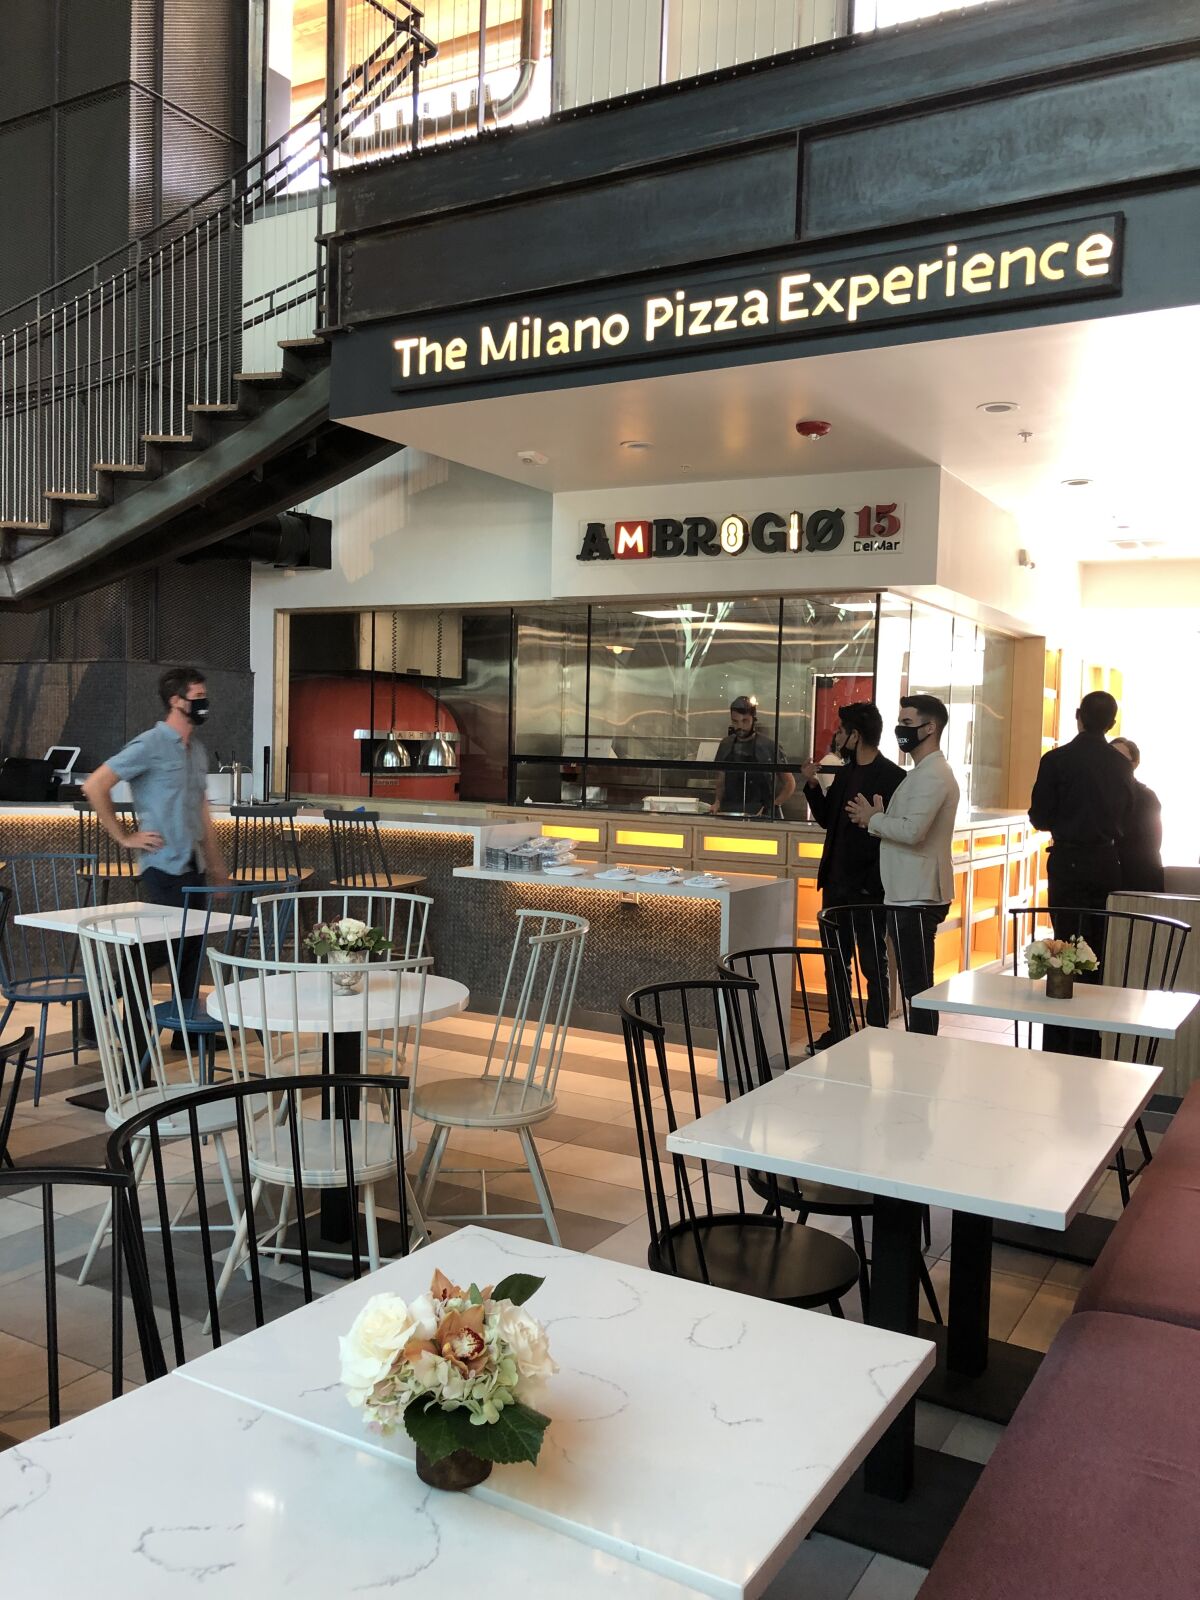 Owners and managers mingle at Ambrogio15, the Milano Pizza Experience, inside the Sky Deck food hall.